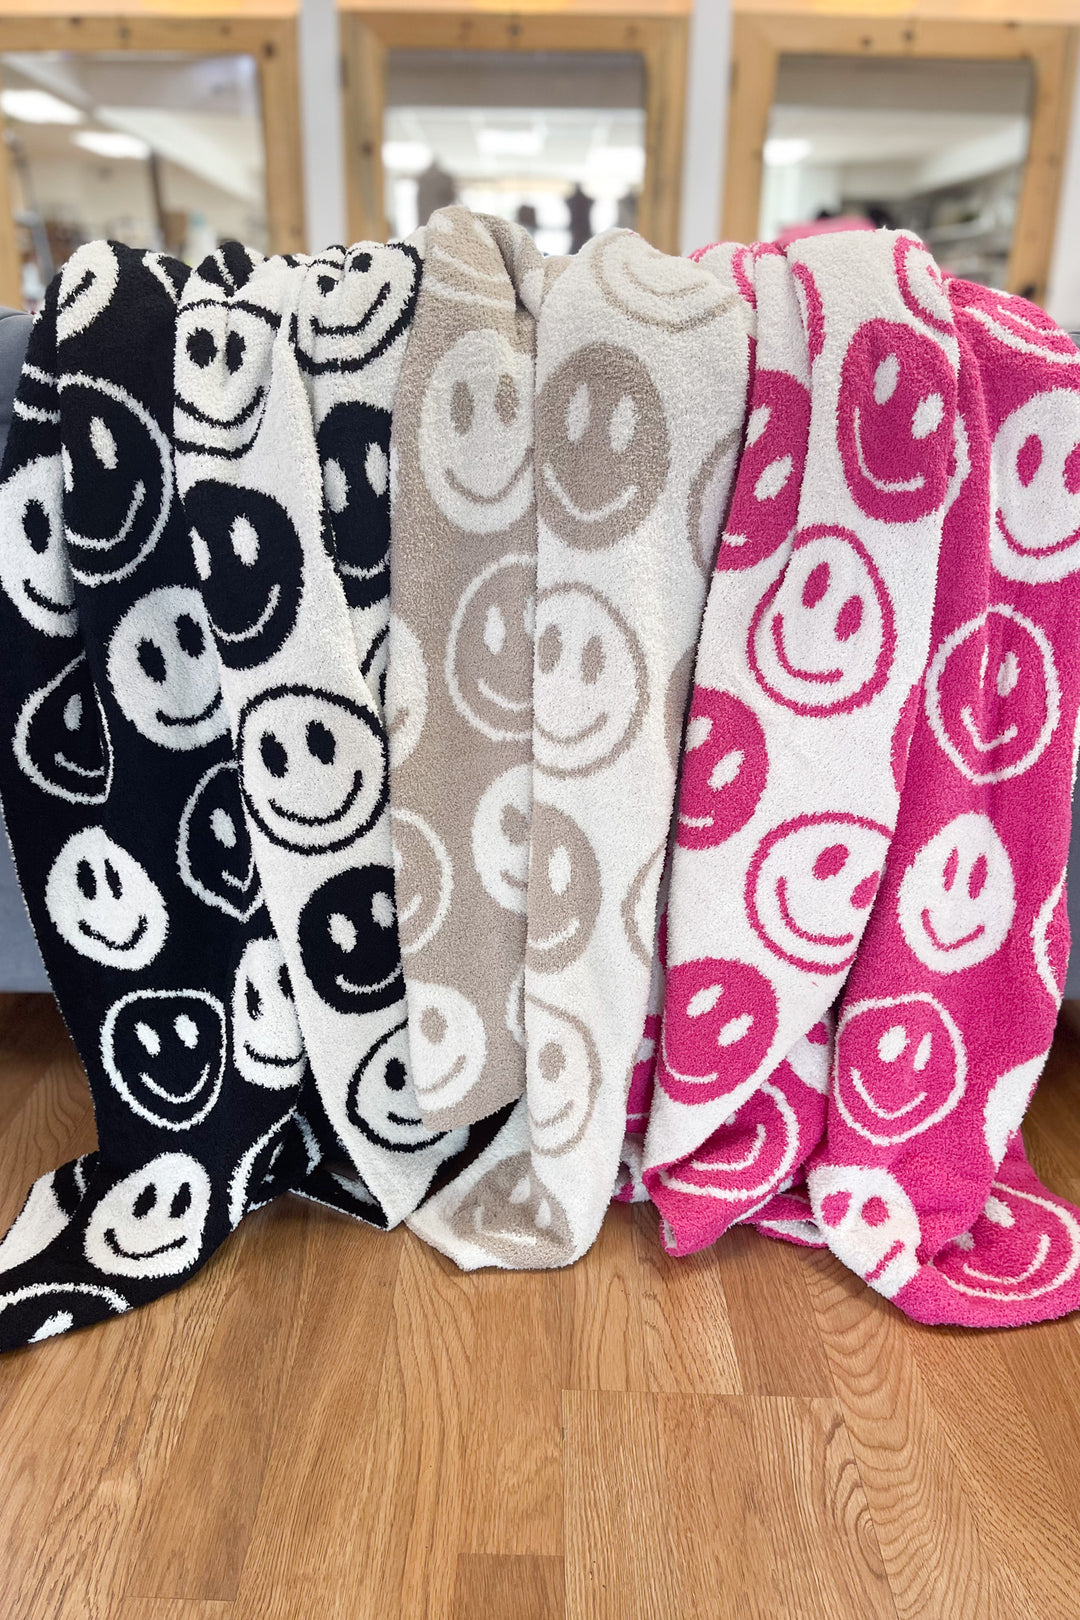 Smiley Face Comfy Luxe Blanket - ShopSpoiled